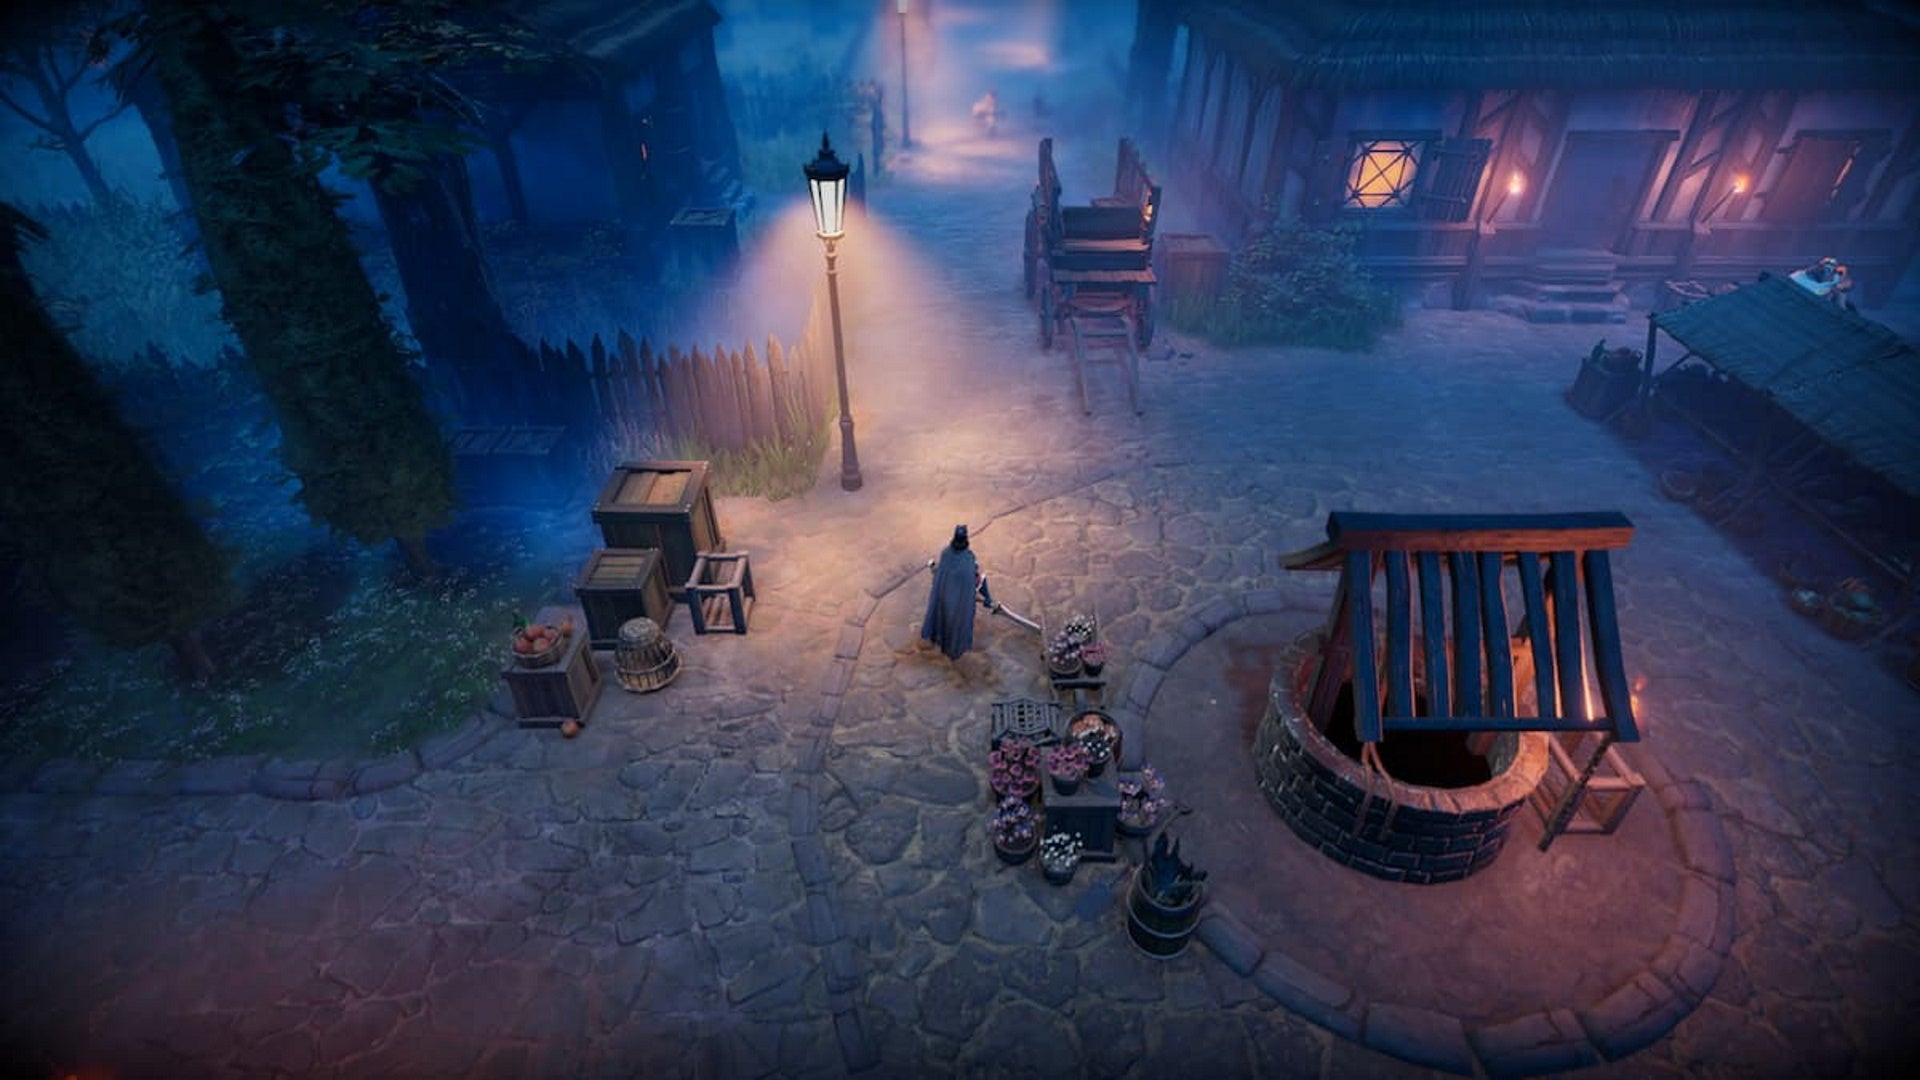 V Rising, a character is standing in the middle of a village at night holding a weapon, there's a Well on the right, some flowers behind them, boxes to the left, and a wooden cart next to a house in front of them